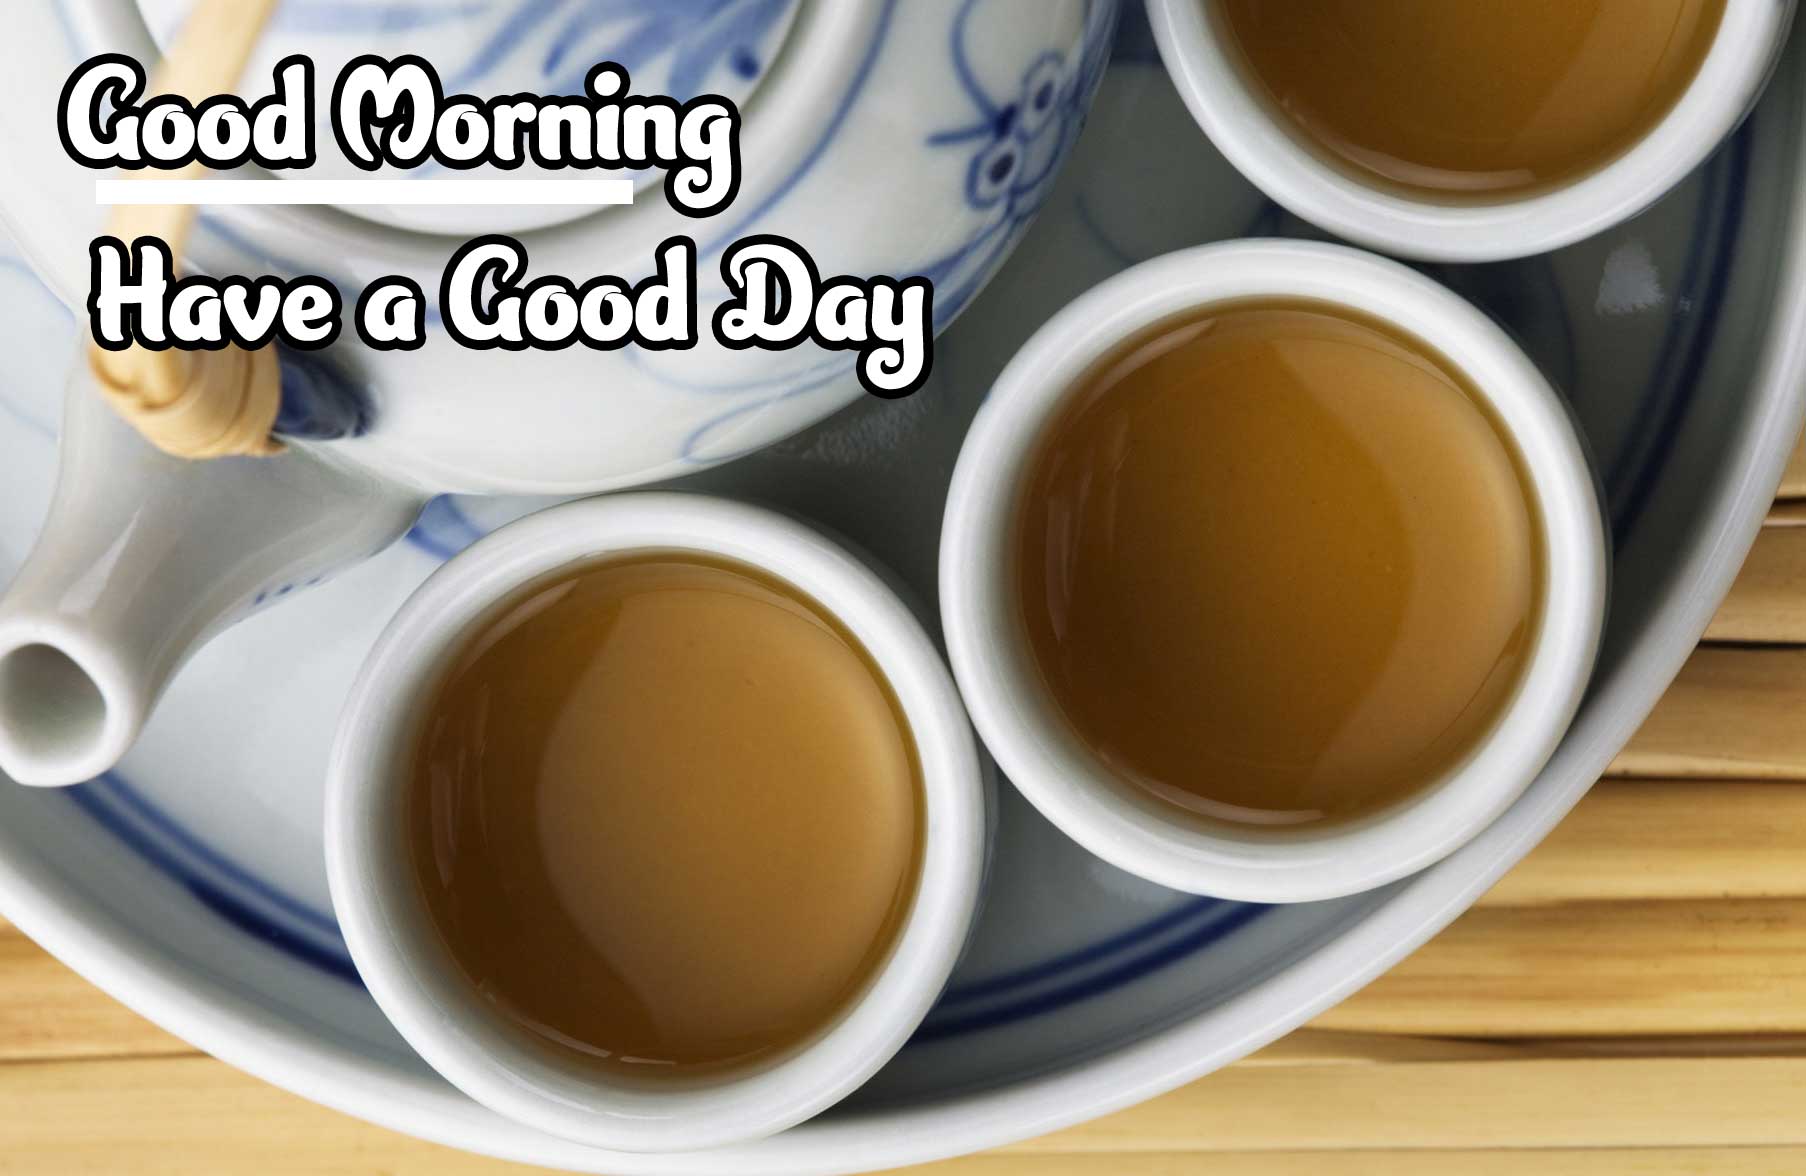 Good Morning Wishes Images 4K 1080p Photo Pictures Download 